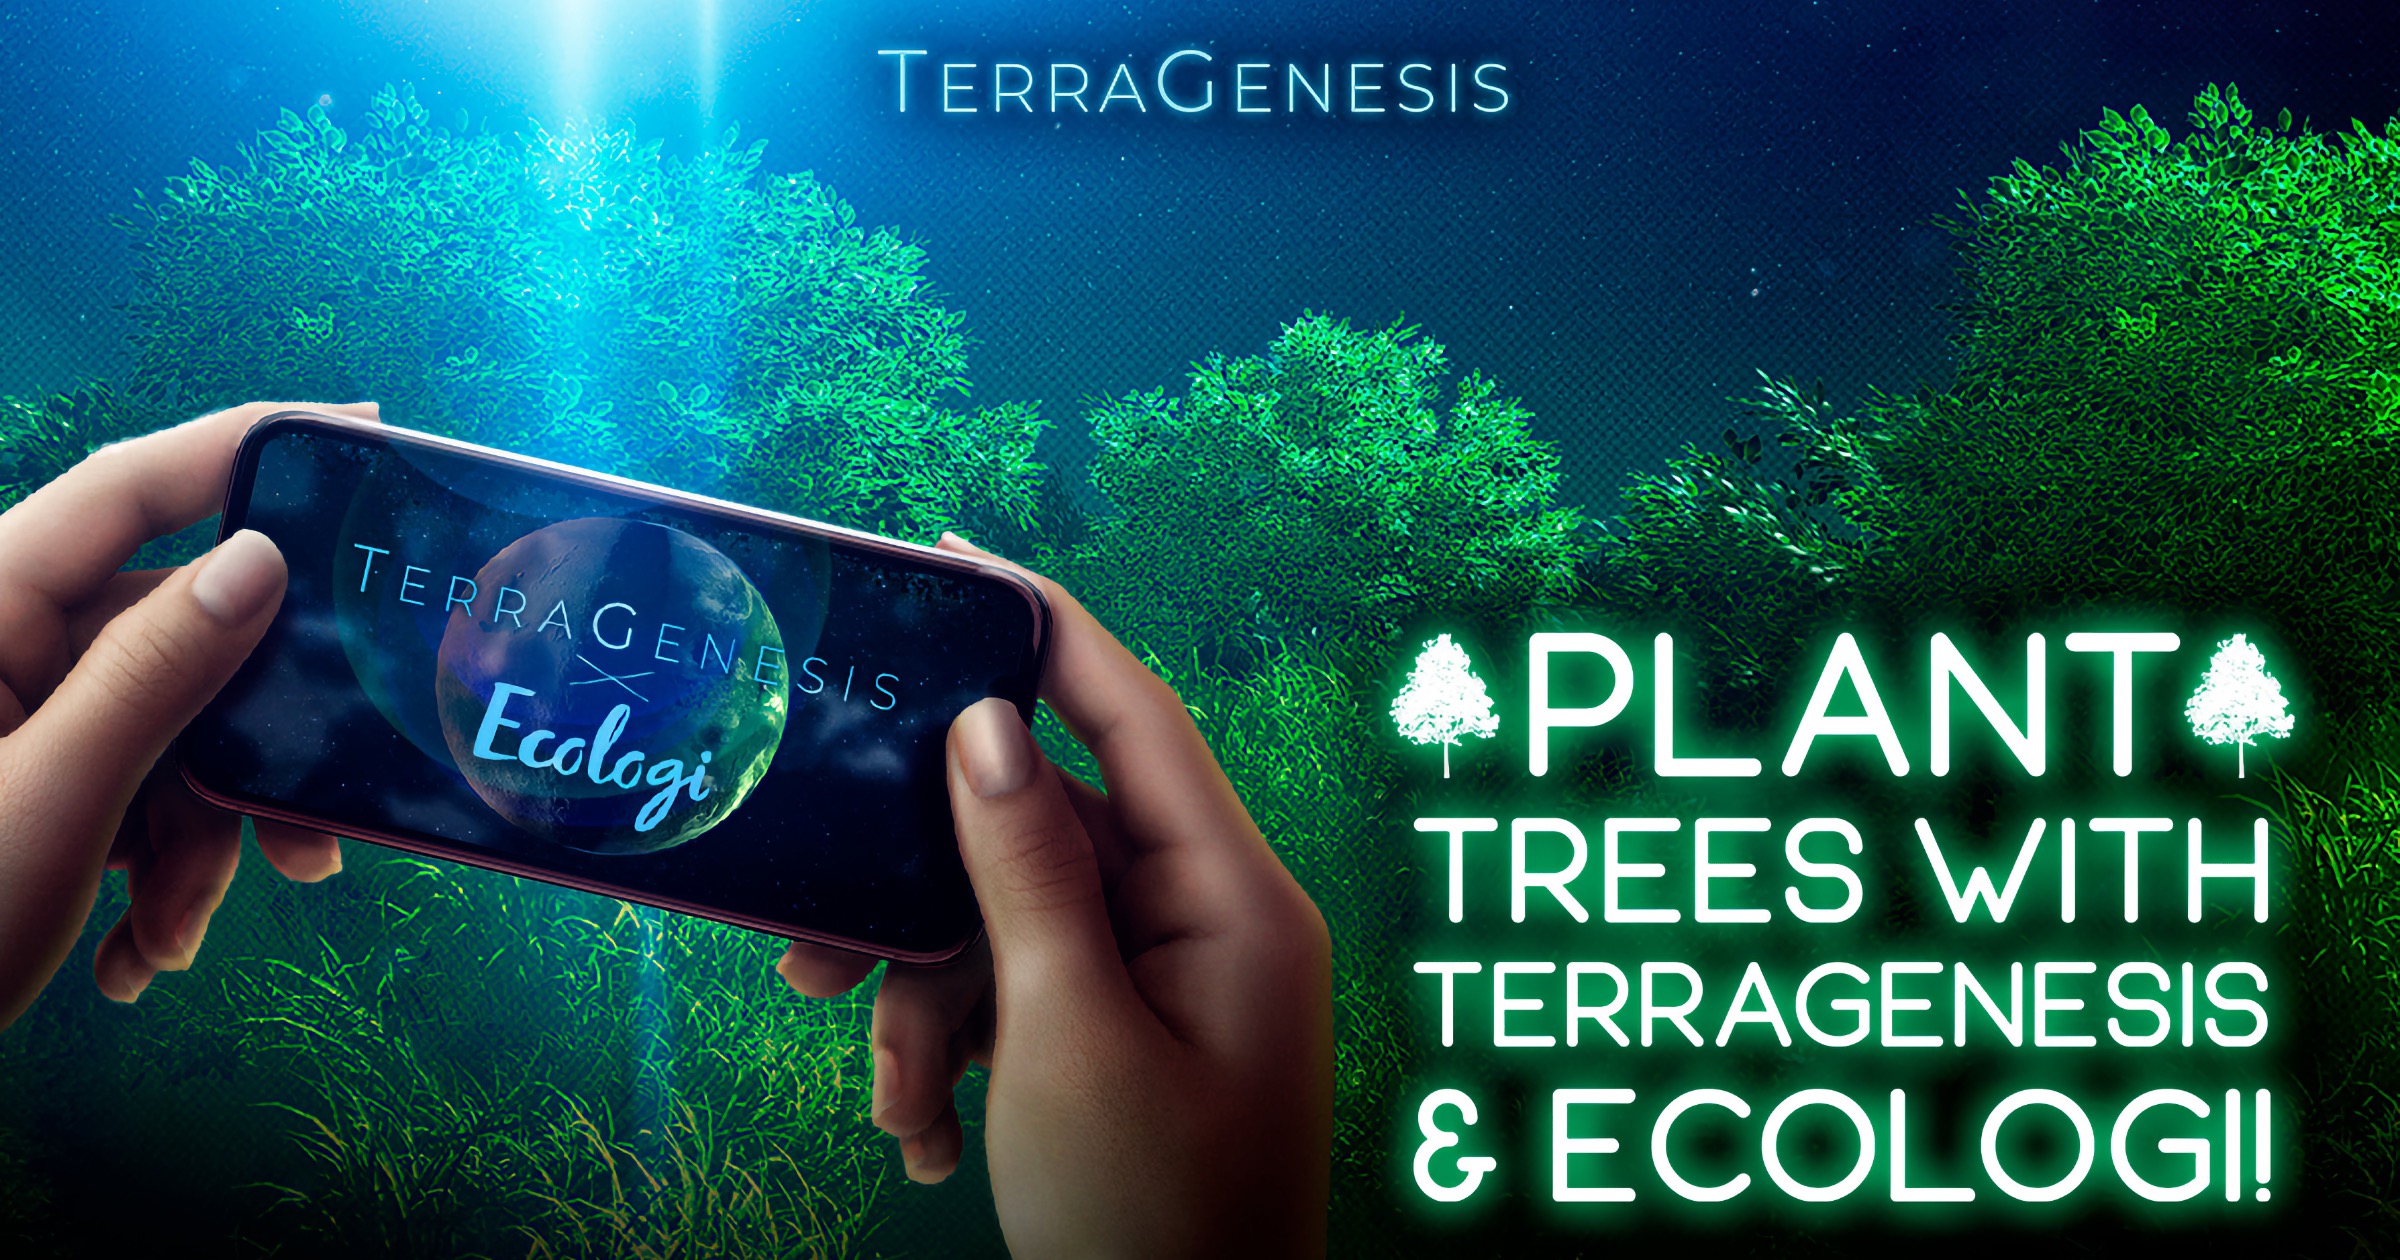 Plant Real Trees While Playing ‘TerraGenesis’ Space Game